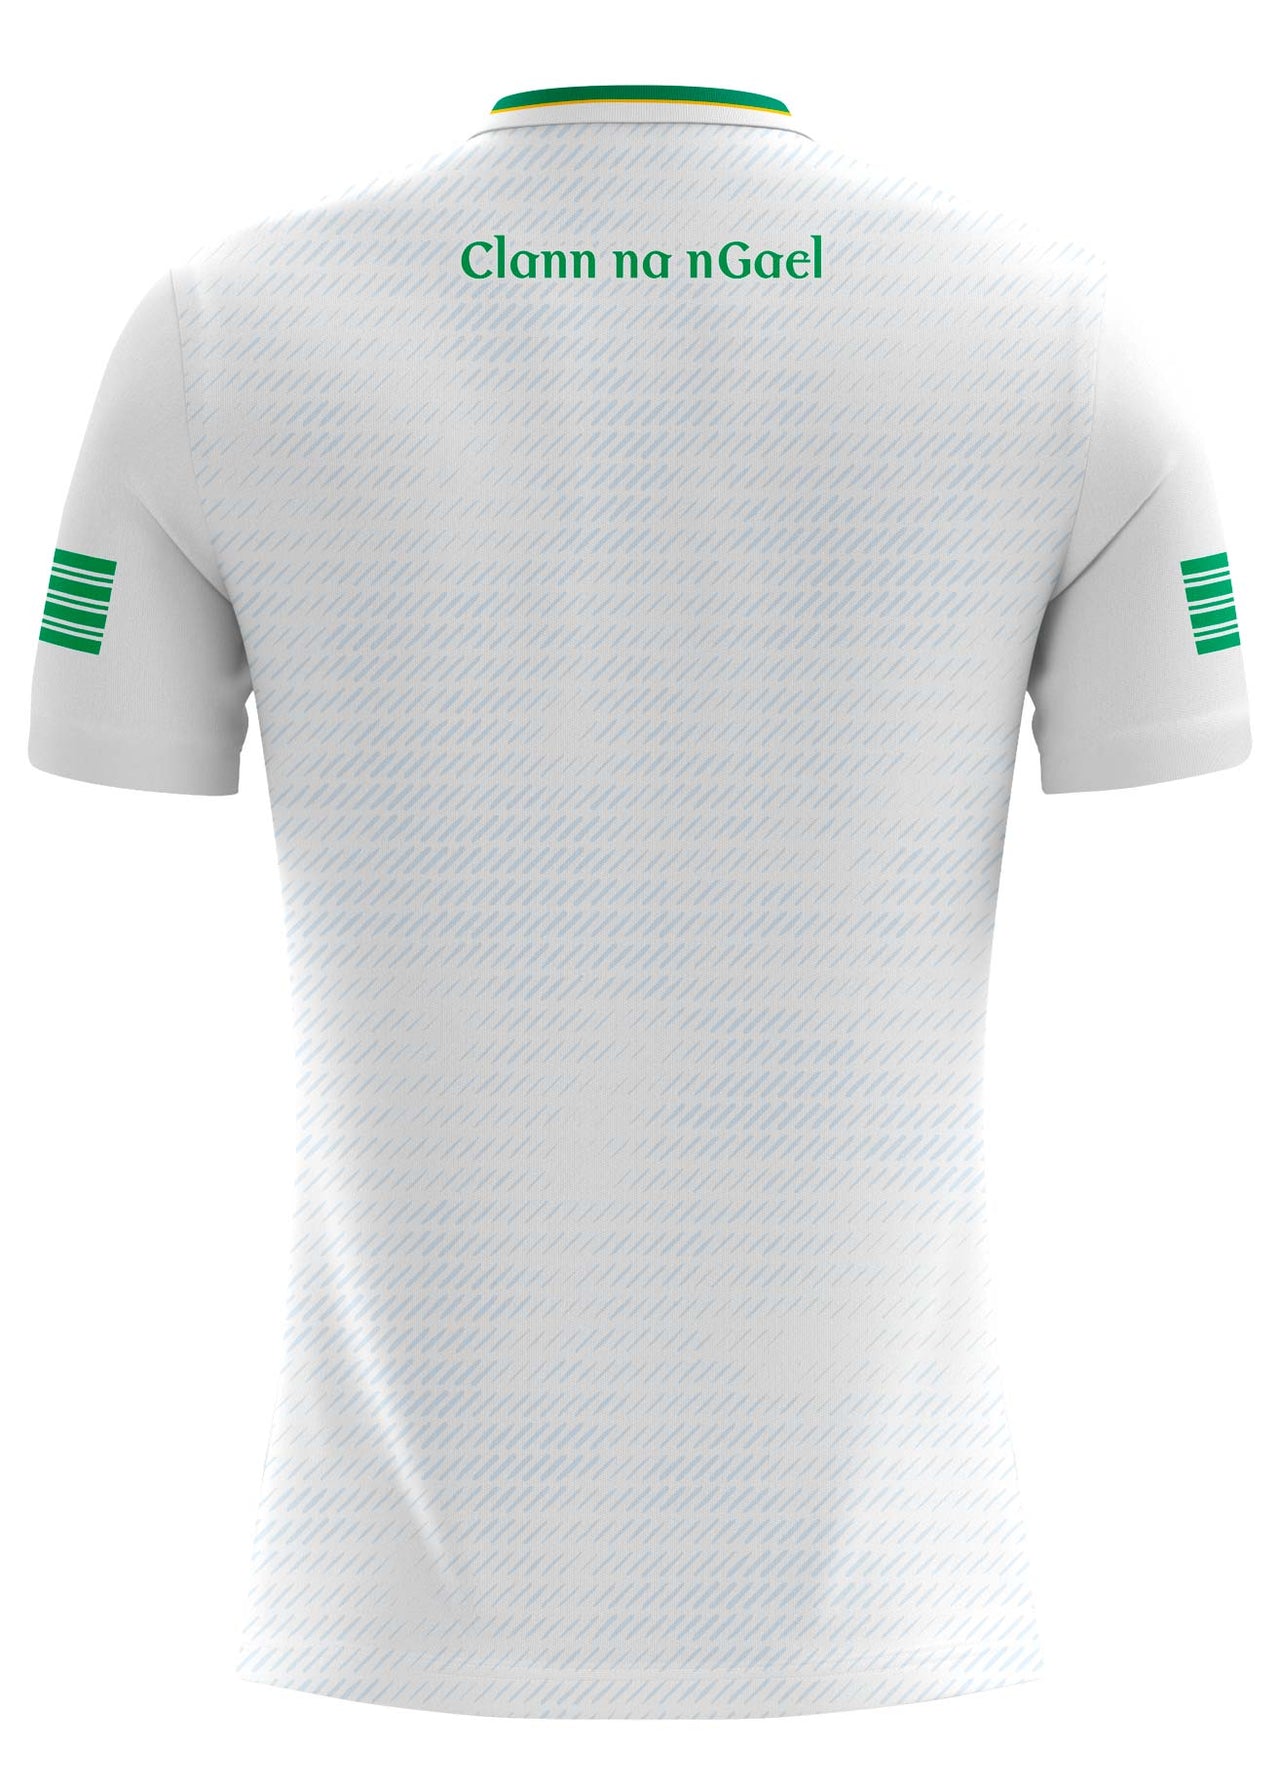 Clann na nGael Away Jersey Regular Fit Adult